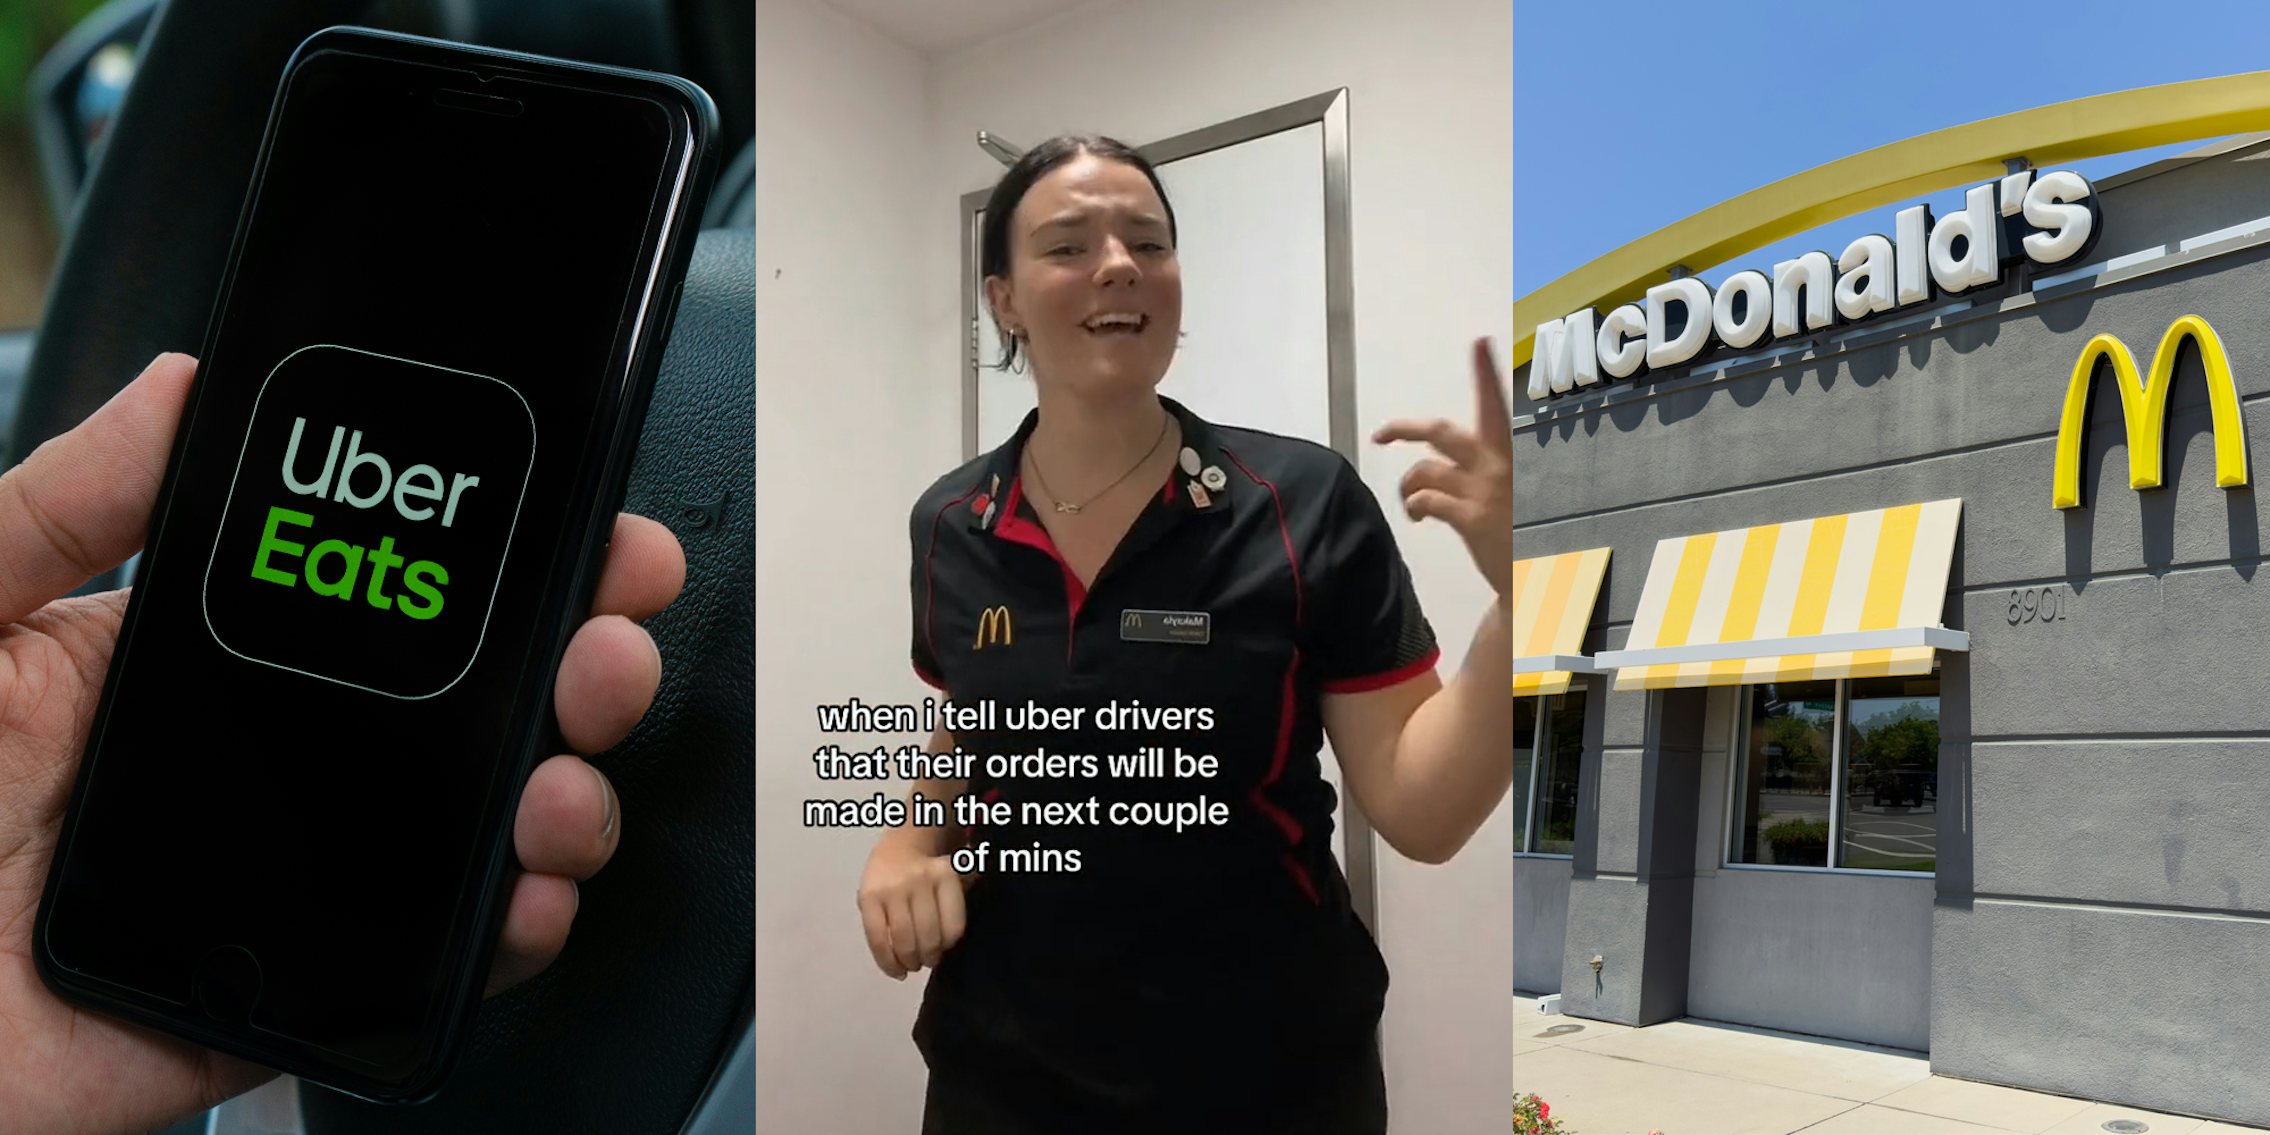 Uber Eats driver in car holding phone with app on screen (l) McDonald's worker with caption 'when i tell uber drivers that their orders will be made in the next couple of mins' (c) McDonald's buildings with signs (r)